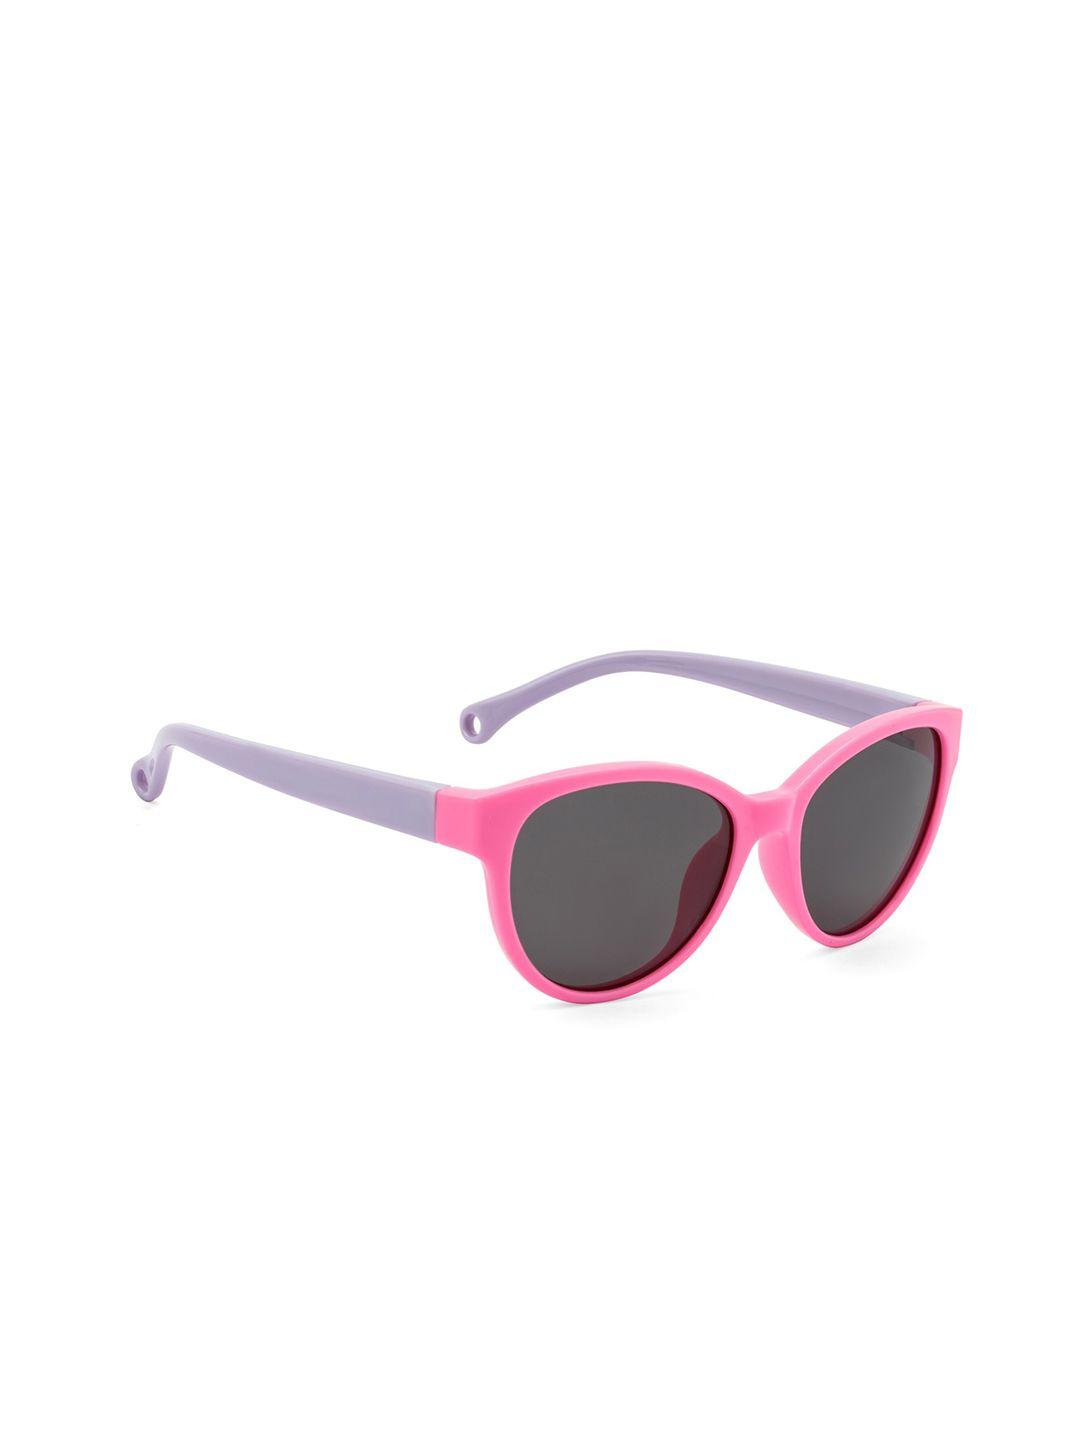 royal son girls cateye sunglasses with polarised and uv protected lens